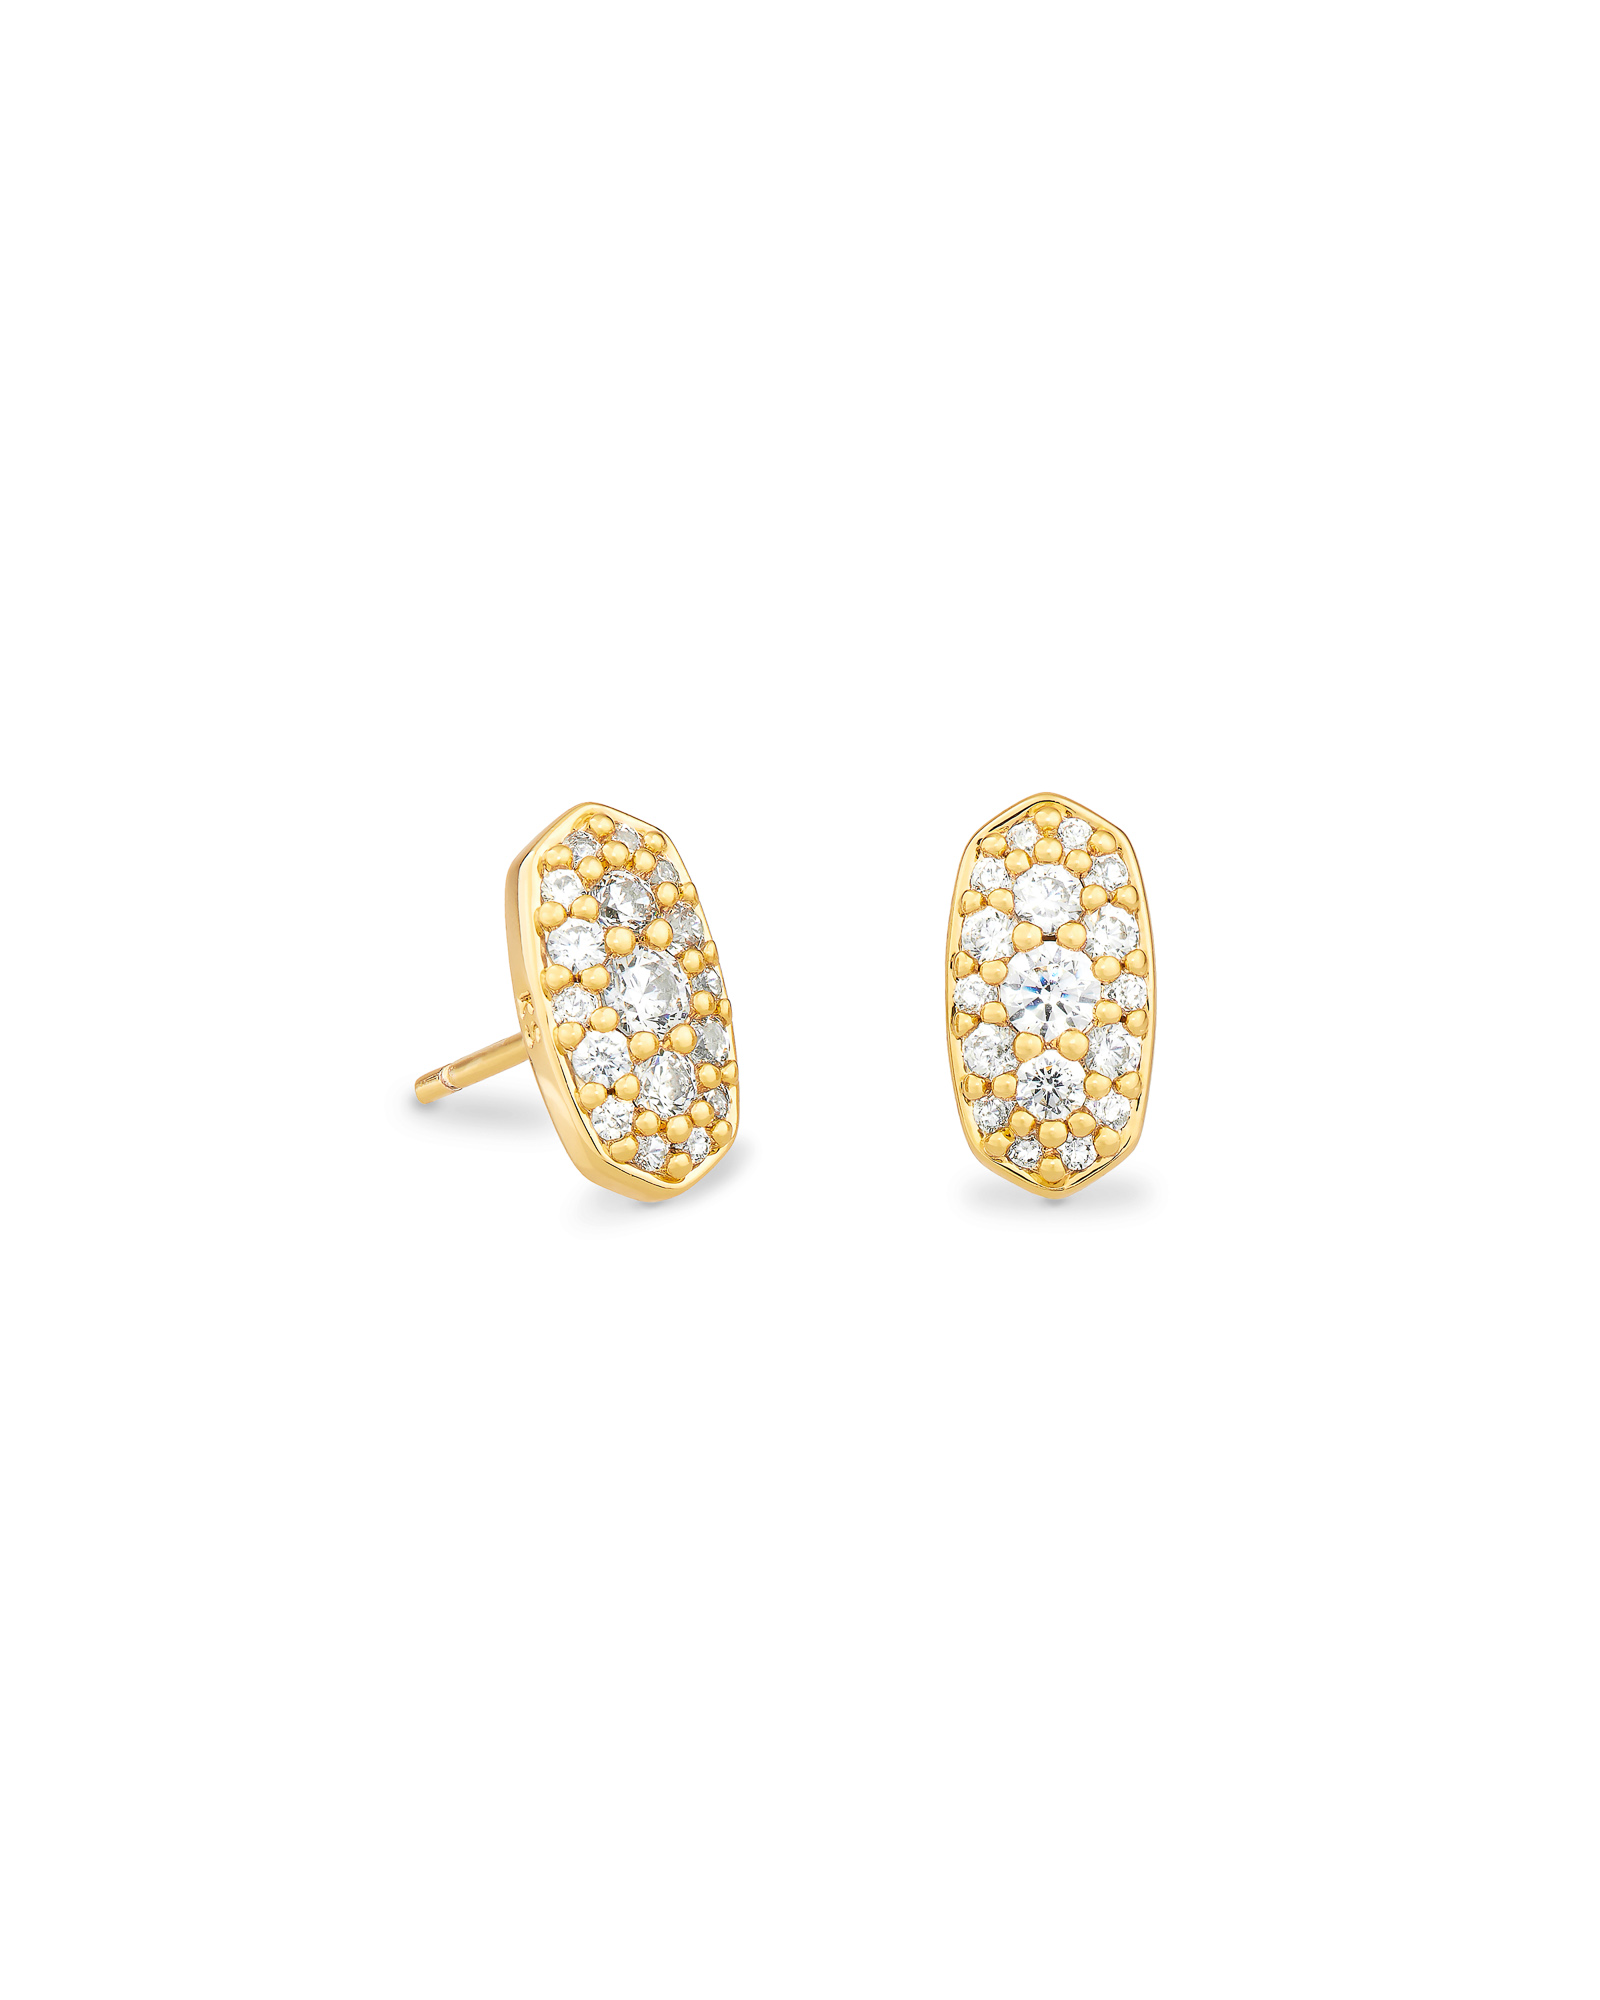 235-GER12241 - 22K Gold Earrings for Women with Pearls | Gold earrings for  women, 22k gold earrings, Women's earrings